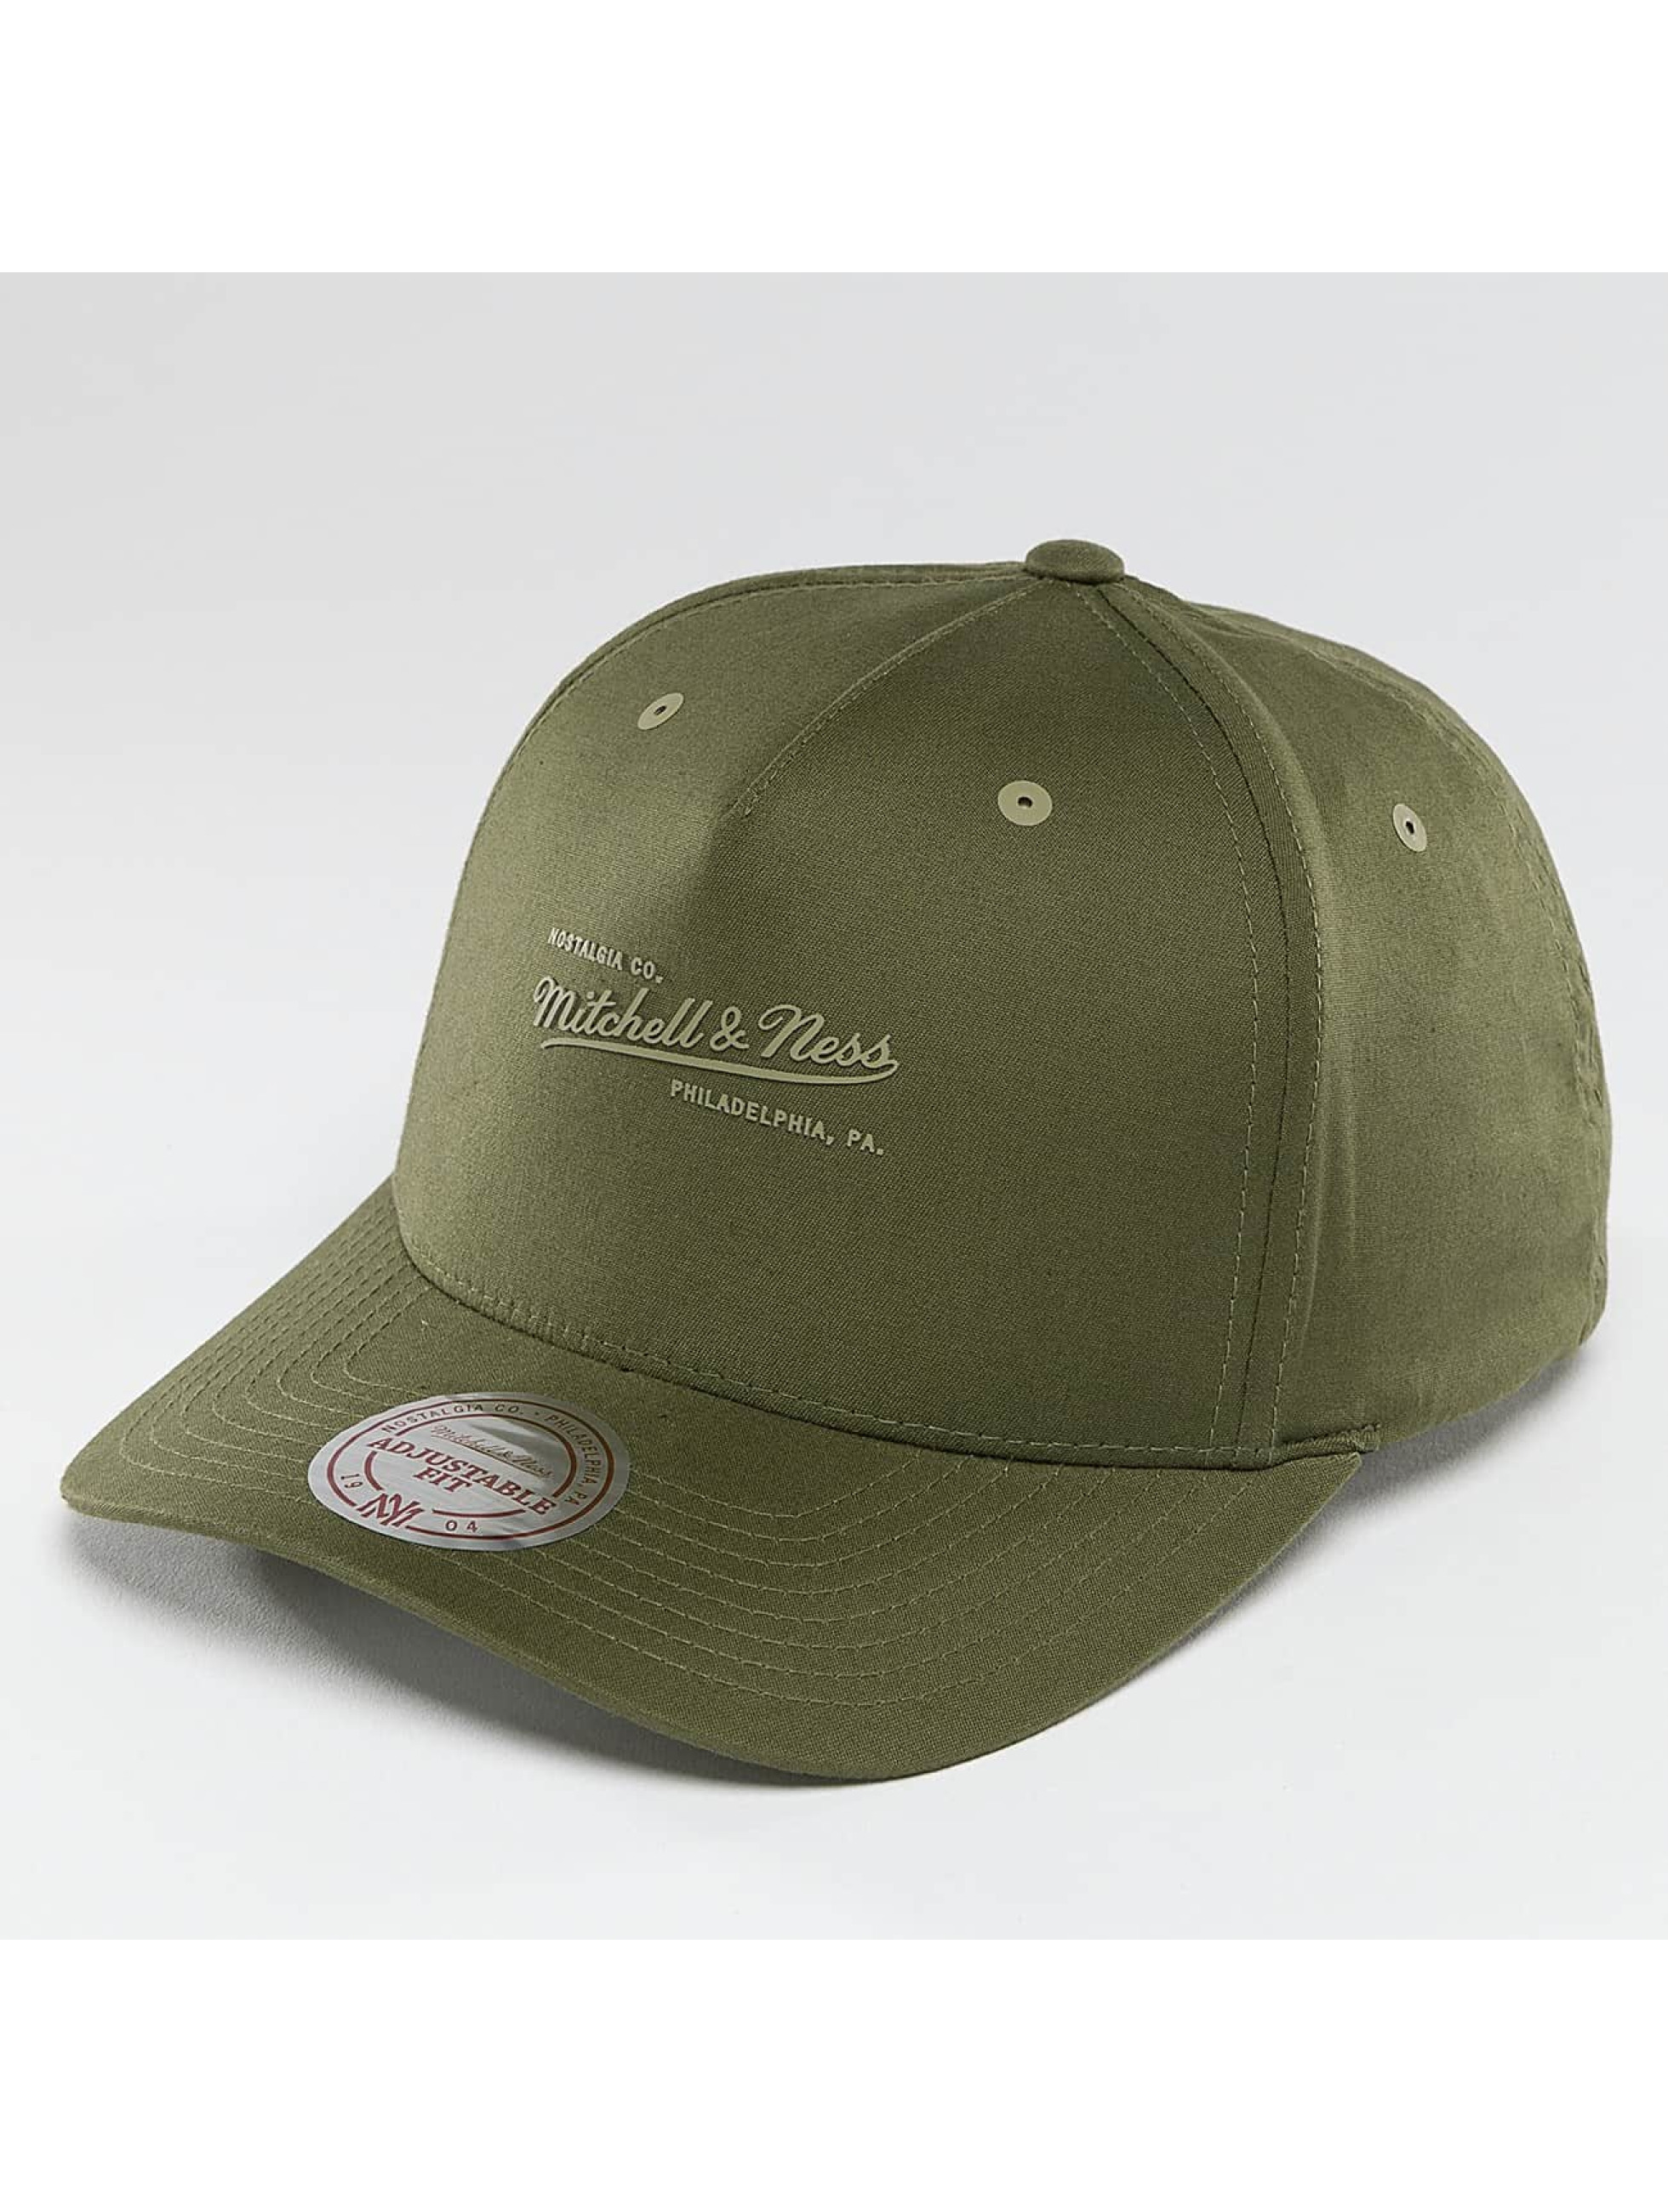 Mitchell & Ness Casquette / Snapback Tactical en olive